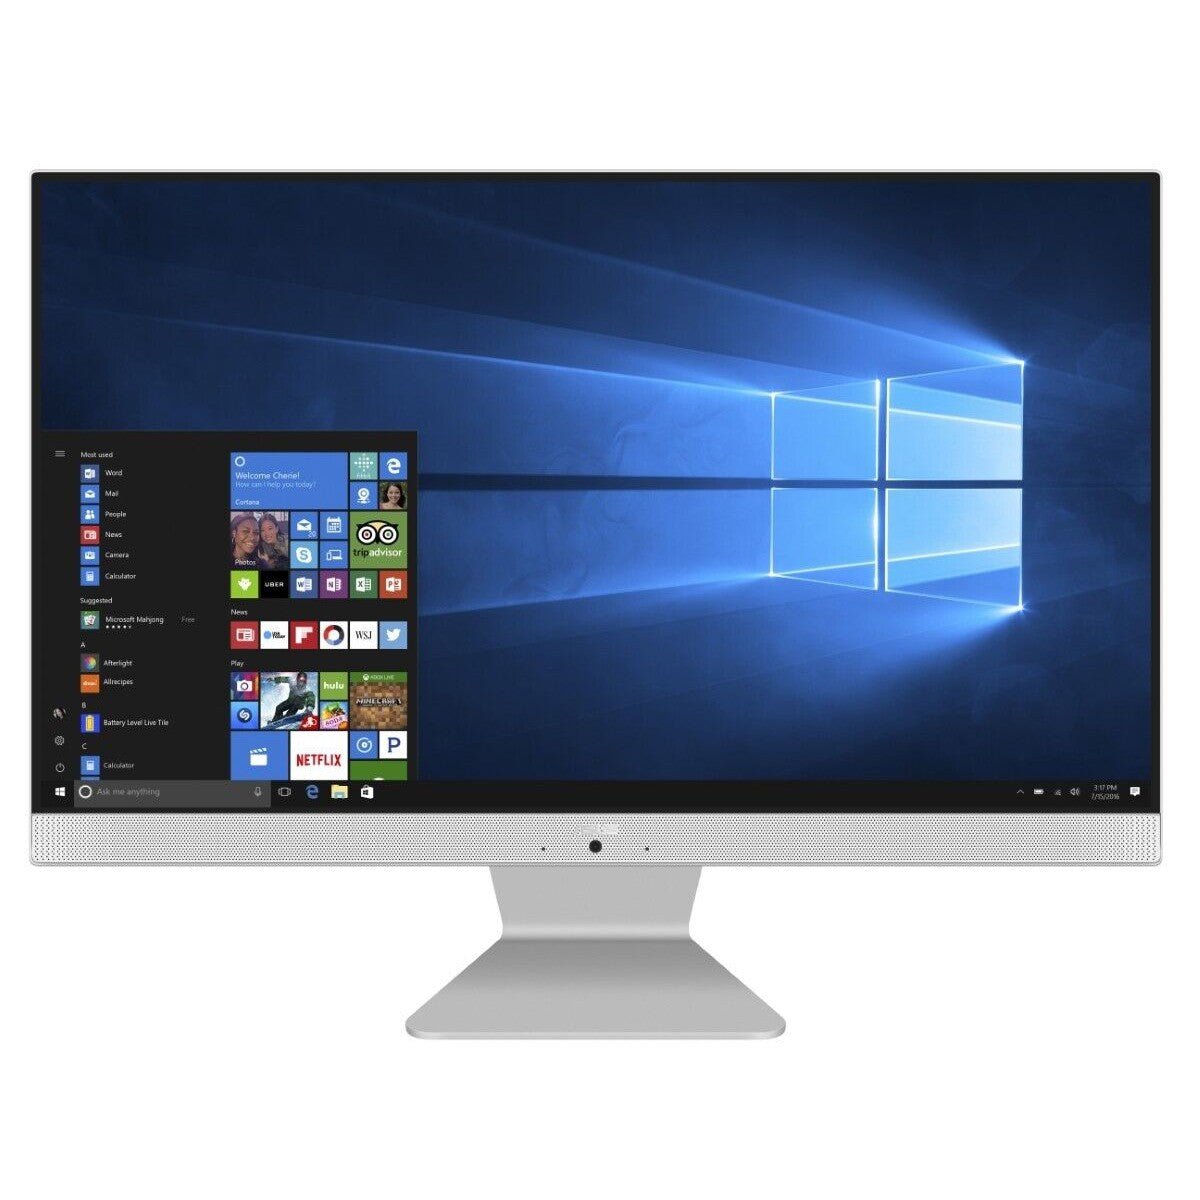 ASUS All-in-One PC V241 23.8in Full HD Intel Core i5 8GB Memory 512GB Storage